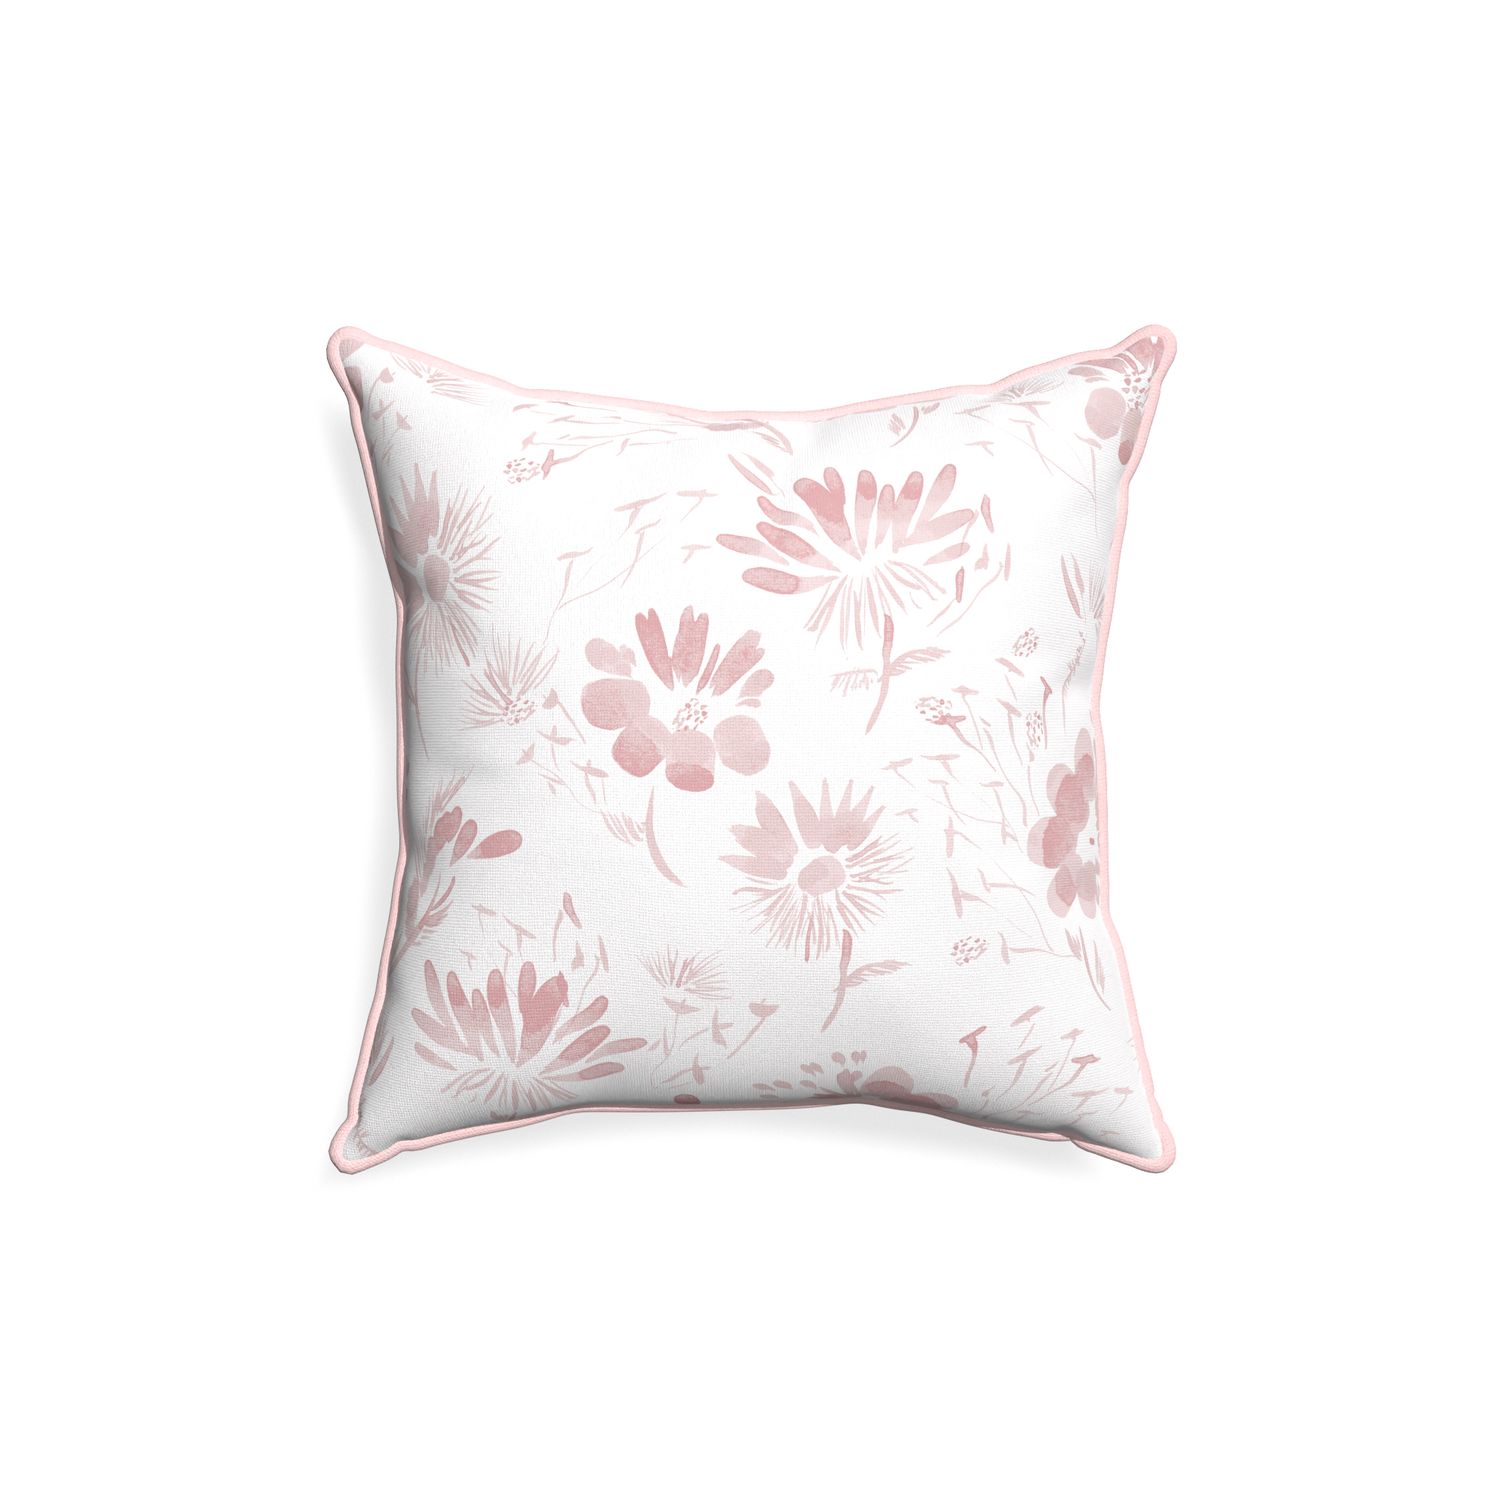 18-square blake custom pink floralpillow with petal piping on white background